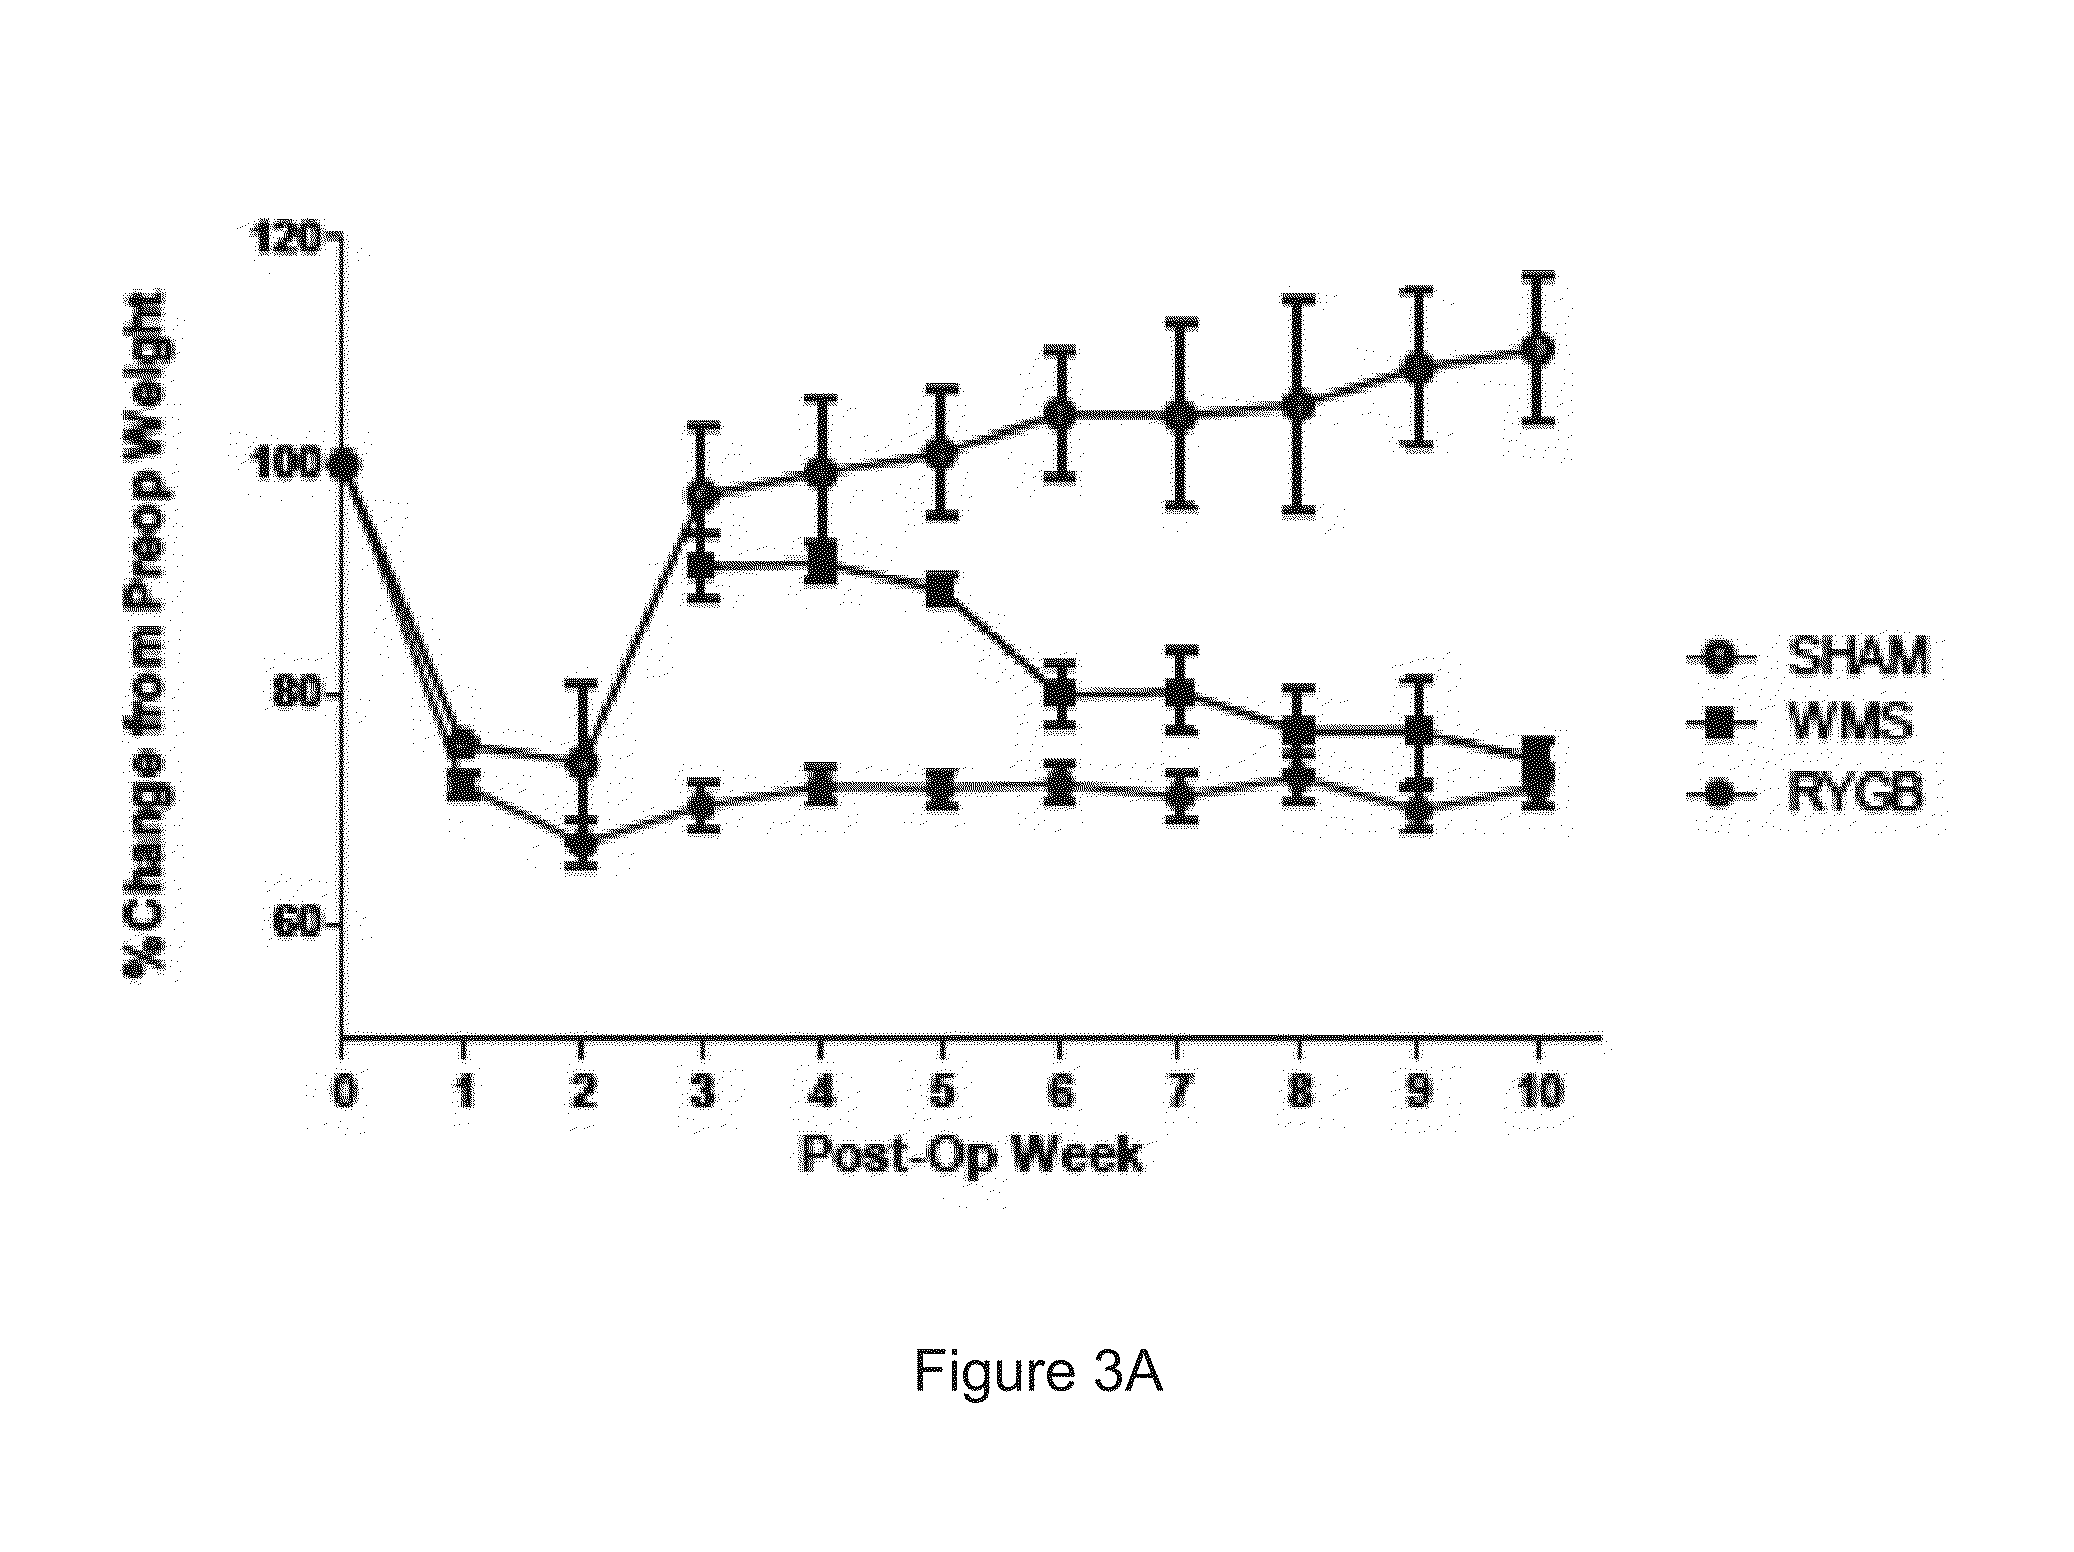 Compositions of microbiota and methods related thereto